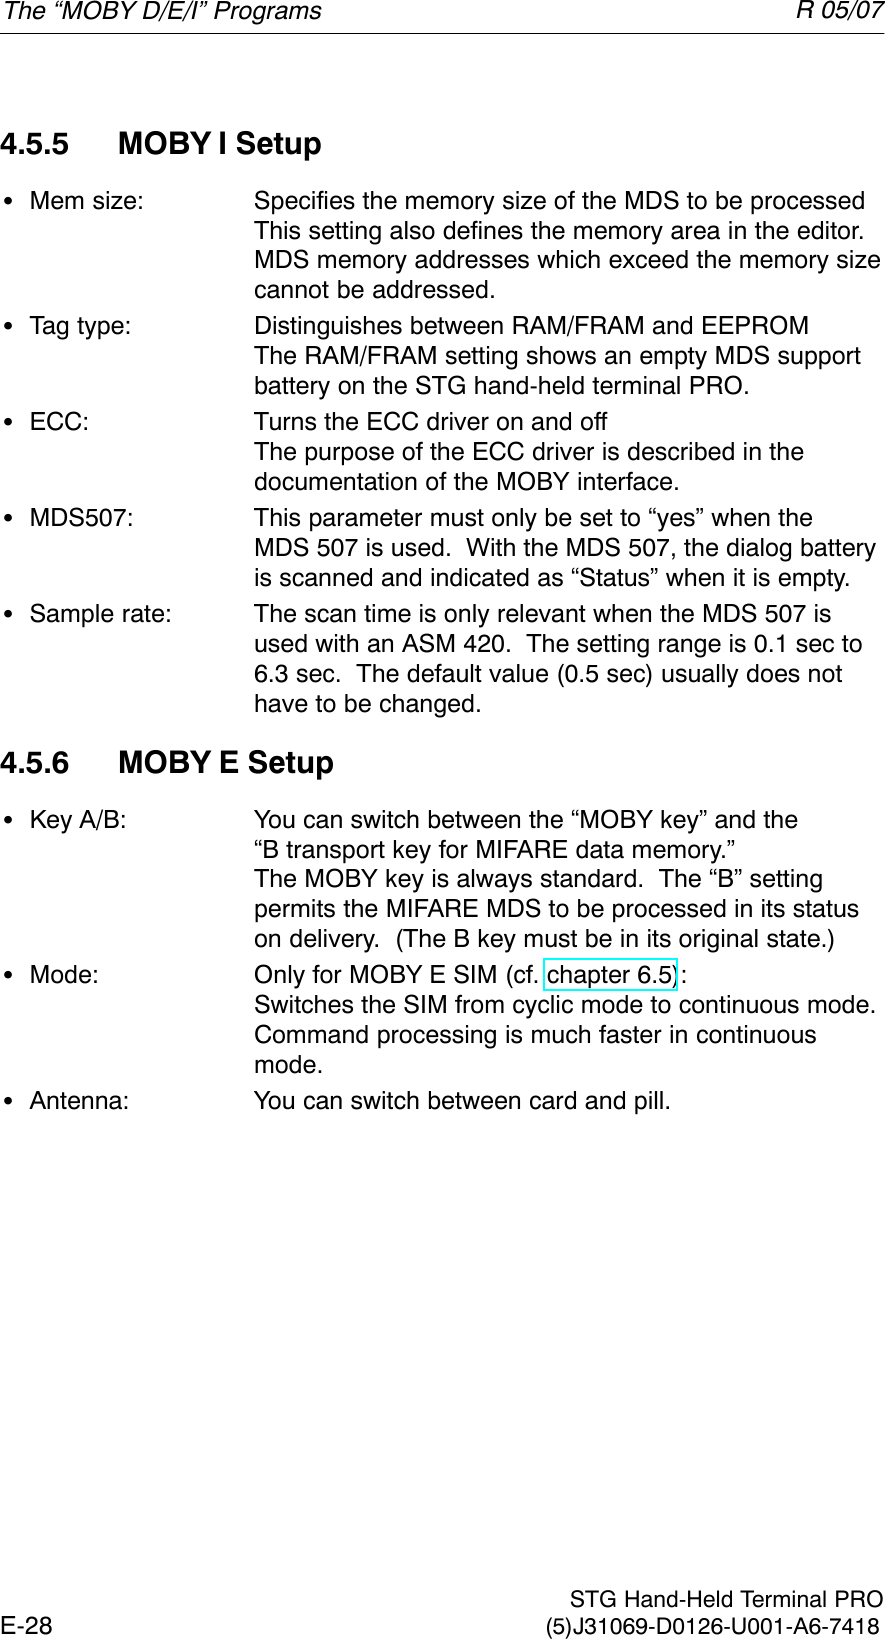 R 05/07E-28  STG Hand-Held Terminal PRO(5)J31069-D0126-U001-A6-74184.5.5 MOBY I SetupSMem size: Specifies the memory size of the MDS to be processedThis setting also defines the memory area in the editor.  MDS memory addresses which exceed the memory sizecannot be addressed.STag type: Distinguishes between RAM/FRAM and EEPROMThe RAM/FRAM setting shows an empty MDS support  battery on the STG hand-held terminal PRO.SECC: Turns the ECC driver on and offThe purpose of the ECC driver is described in the documentation of the MOBY interface.SMDS507: This parameter must only be set to “yes” when the MDS 507 is used.  With the MDS 507, the dialog batteryis scanned and indicated as “Status” when it is empty.SSample rate: The scan time is only relevant when the MDS 507 is used with an ASM 420.  The setting range is 0.1 sec to 6.3 sec.  The default value (0.5 sec) usually does nothave to be changed.4.5.6 MOBY E SetupSKey A/B: You can switch between the “MOBY key” and the “B transport key for MIFARE data memory.” The MOBY key is always standard.  The “B” setting permits the MIFARE MDS to be processed in its statuson delivery.  (The B key must be in its original state.)SMode: Only for MOBY E SIM (cf. chapter 6.5):Switches the SIM from cyclic mode to continuous mode.Command processing is much faster in continuousmode.SAntenna: You can switch between card and pill.The “MOBY D/E/I” Programs